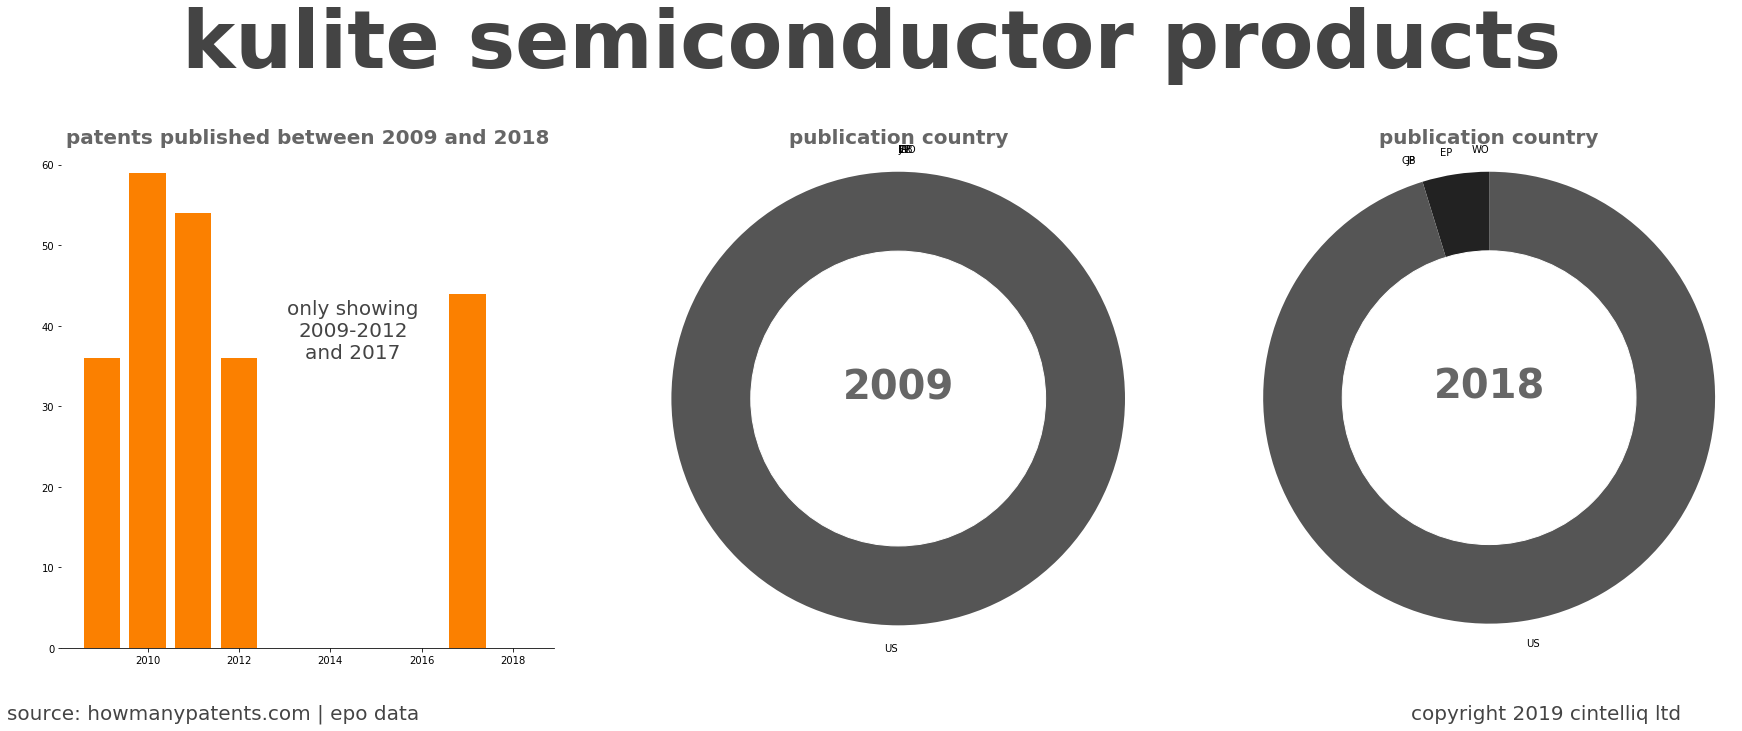 summary of patents for Kulite Semiconductor Products